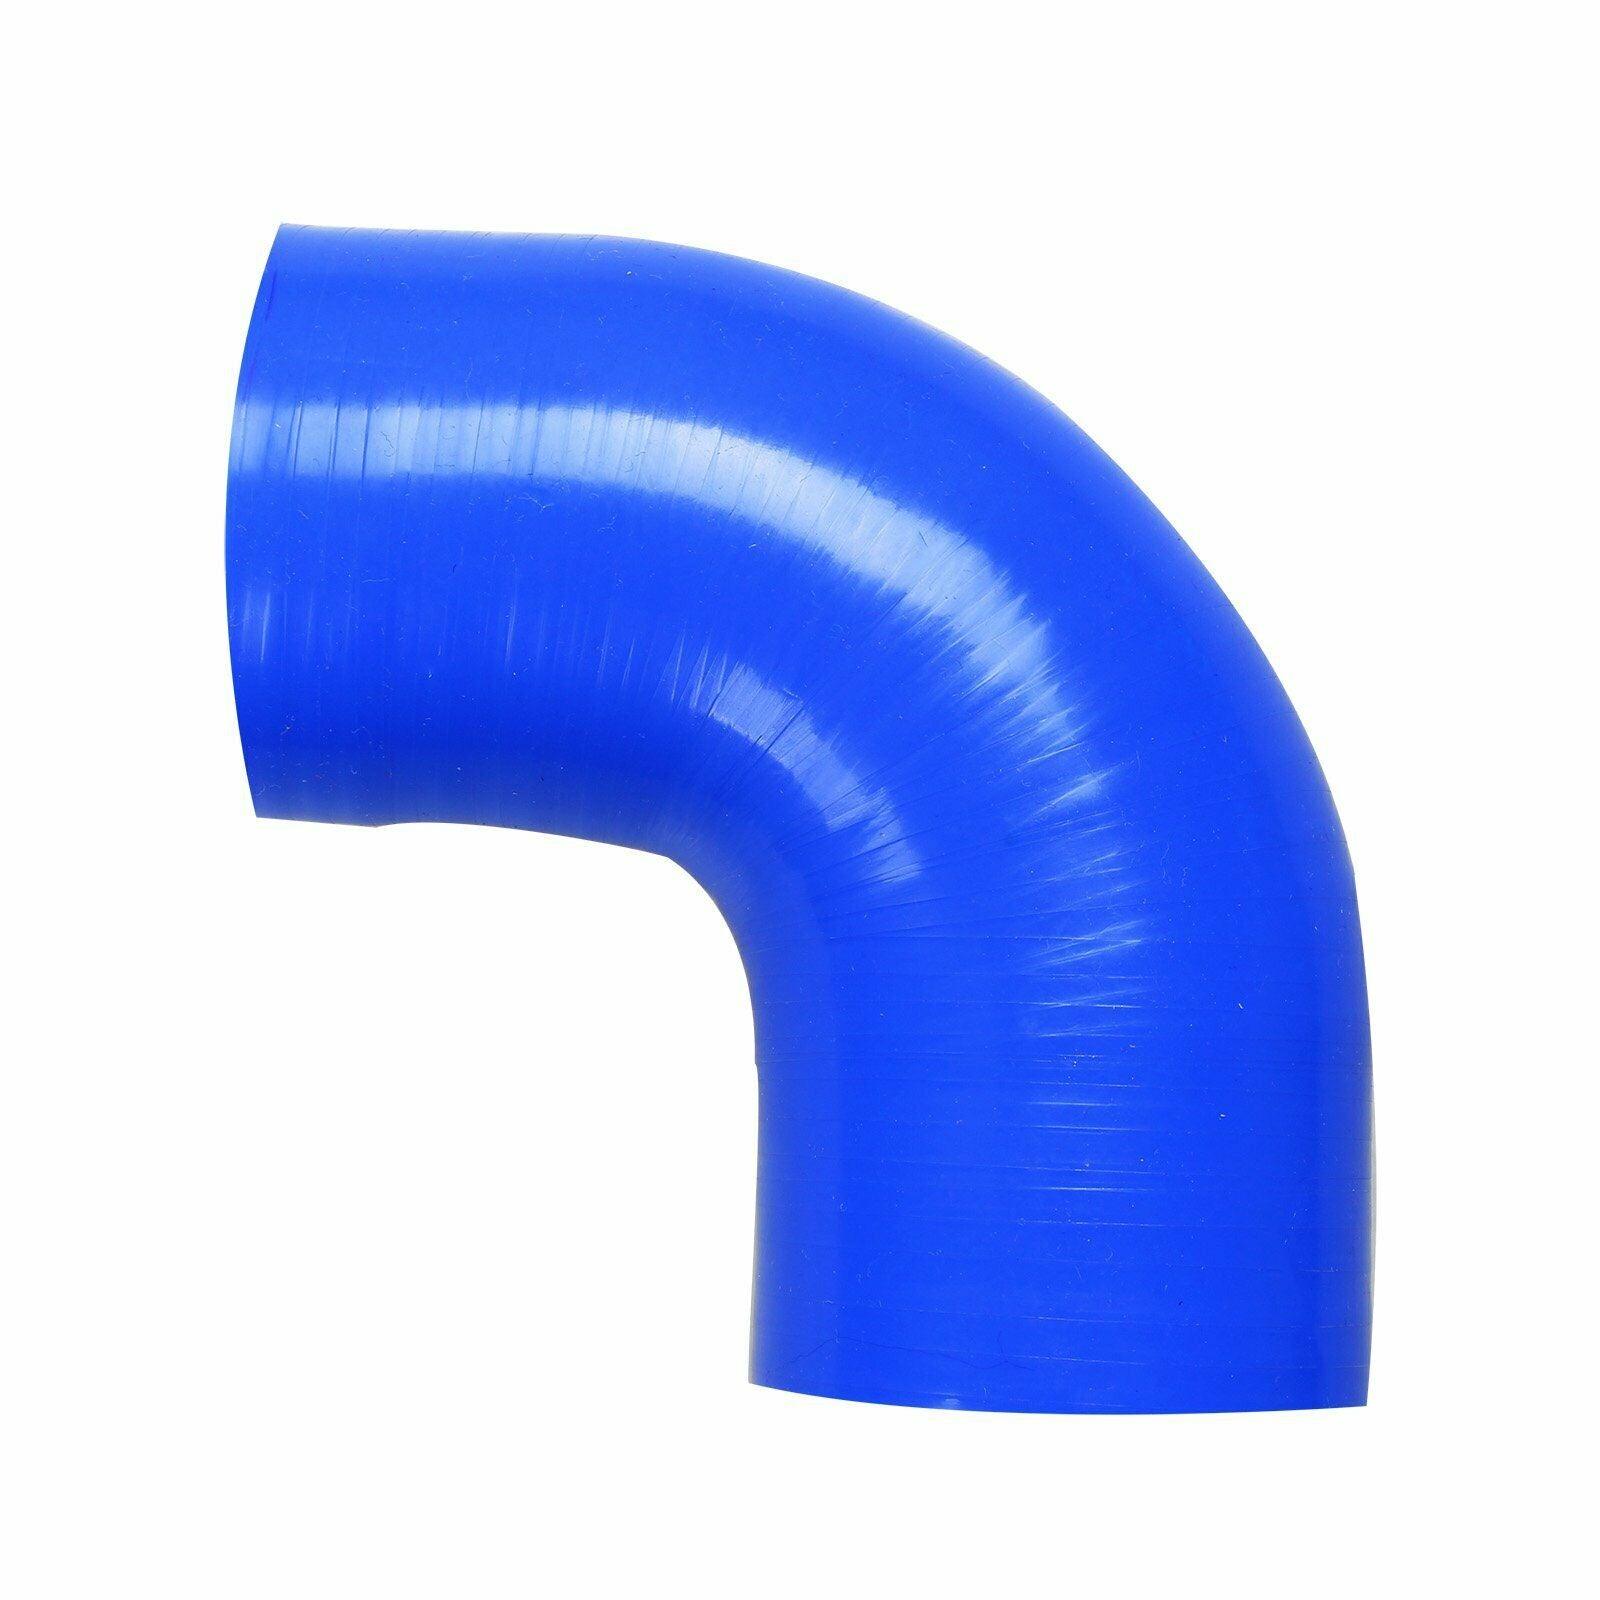 Blue 2" 90 Degree Elbow Silicone Hose Coupler 51mm Intercooler Pipe 2.0" inch - www.blackhorse-racing.com